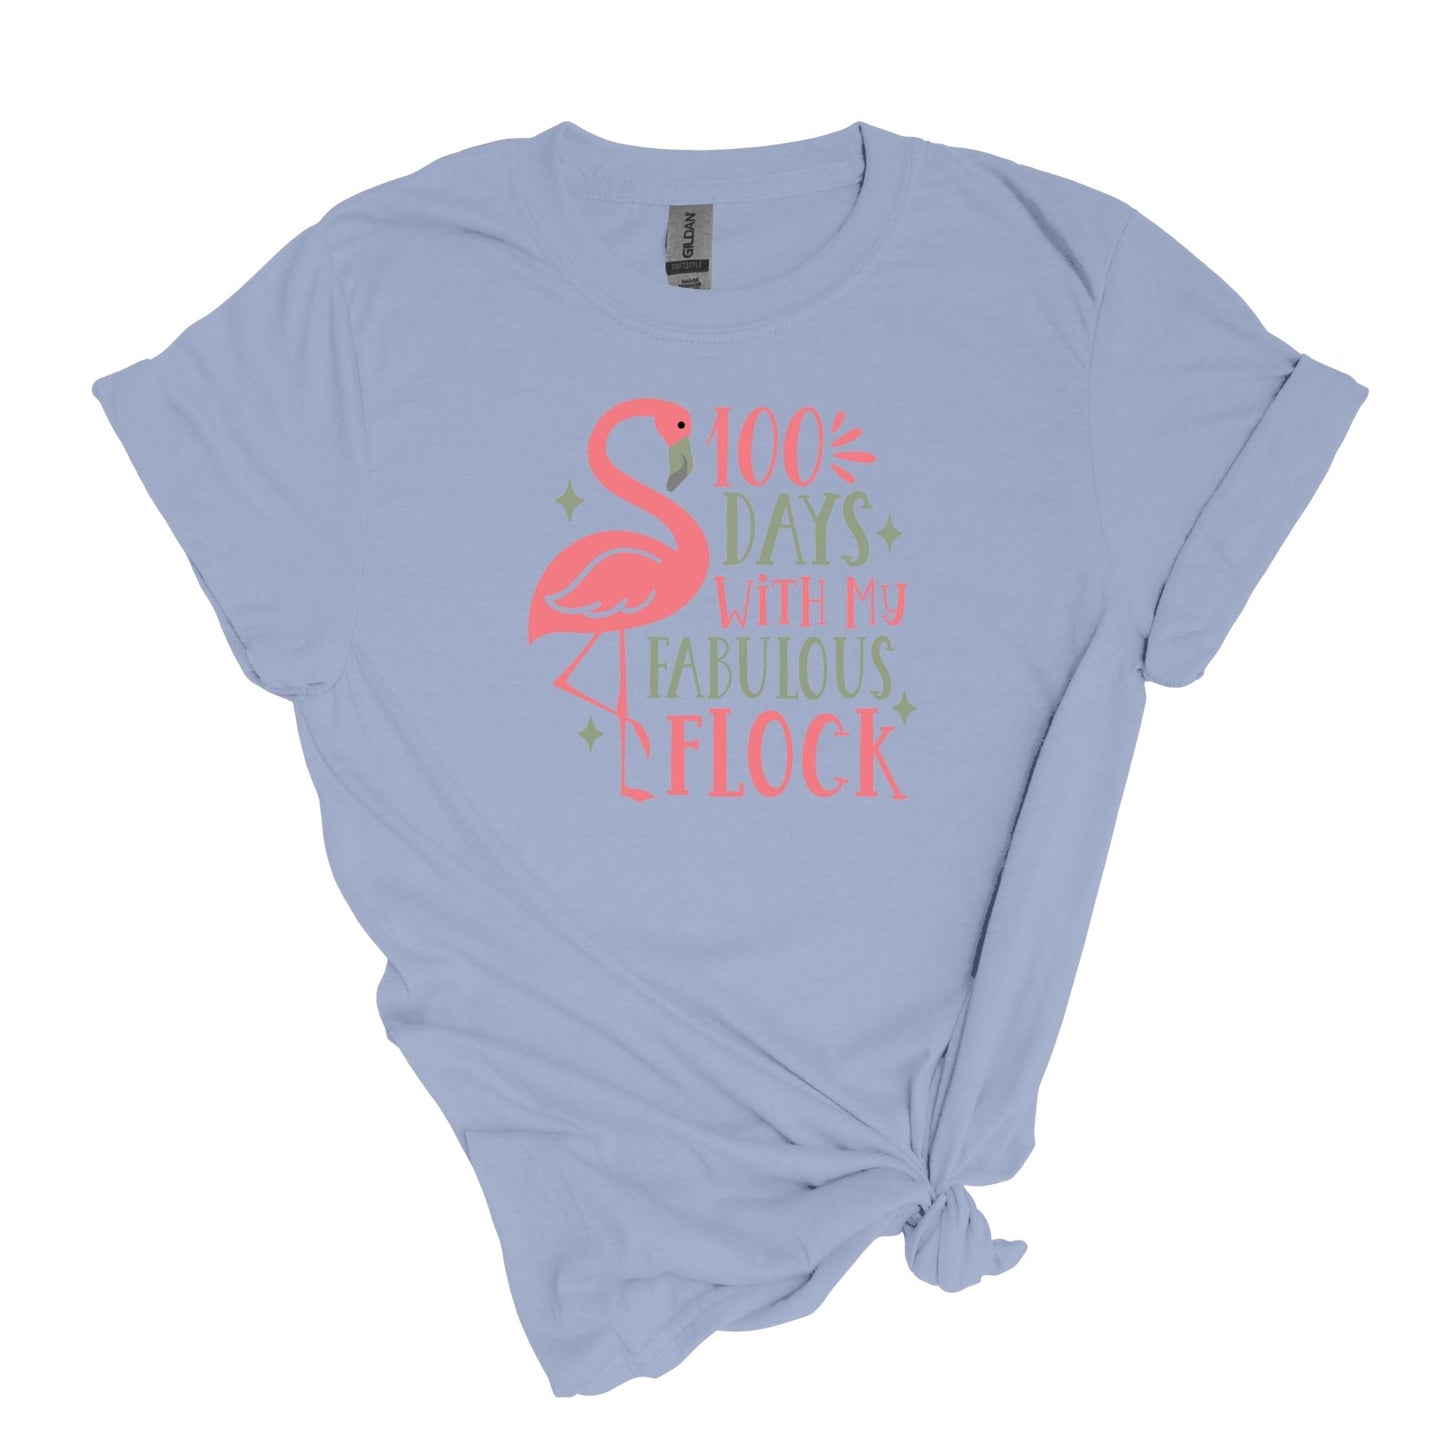 100 Days with my fabulous flock - Shirt for Teachers - Adult Unisex Soft Style T-shirt